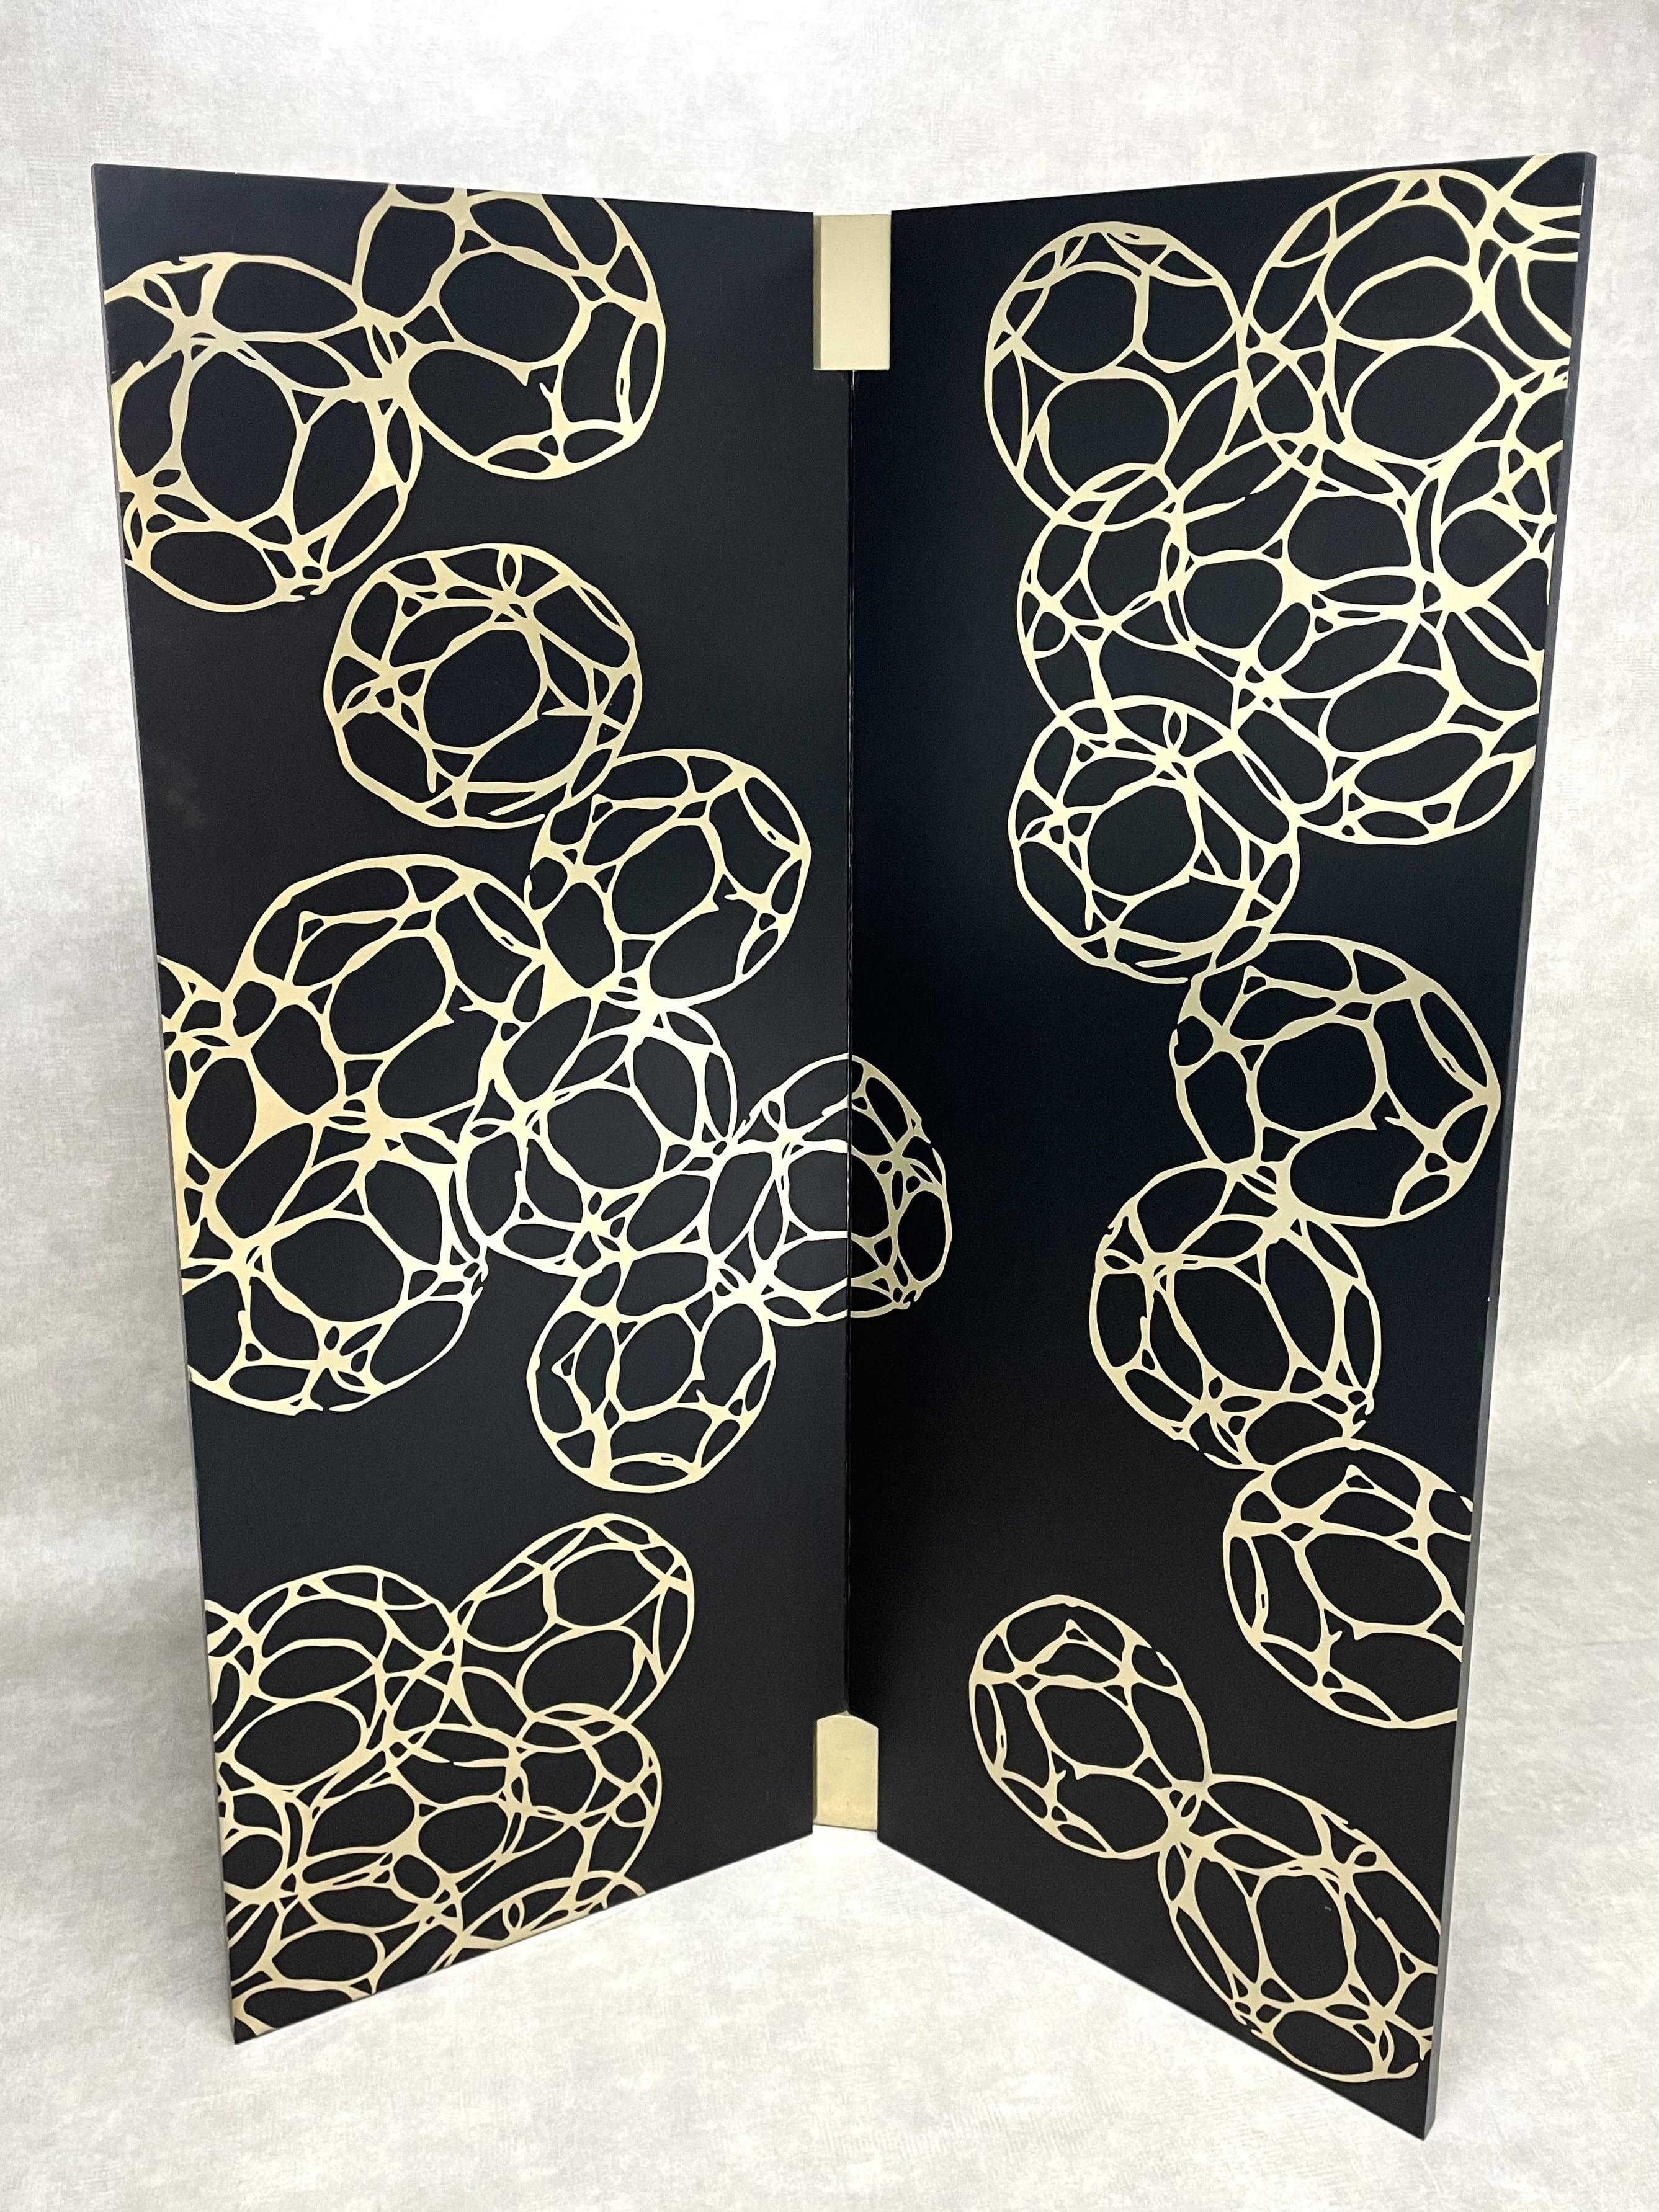 Oak screen. One side is matte black lacquer with shiny brass inlay work. The other side is polished, gold-colored titanium with polished brass inlay patterns. The dimensions of the screen can be adjusted and more panels can be added.
Dimensions : L